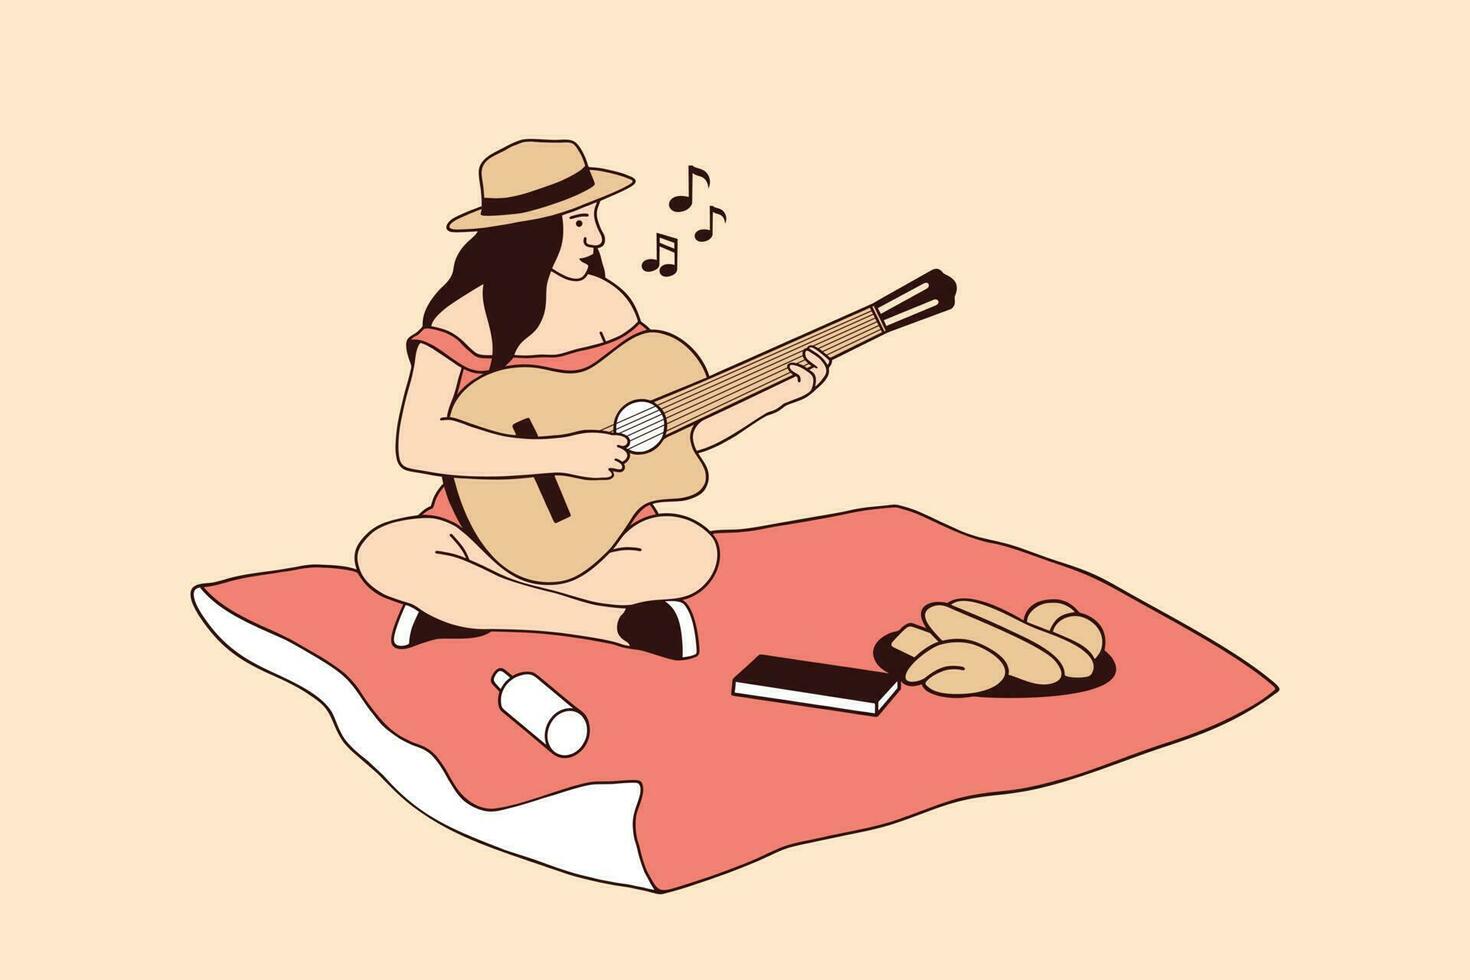 Illustrations of Beautiful Young woman enjoying a picnic and playing guitar in the park vector